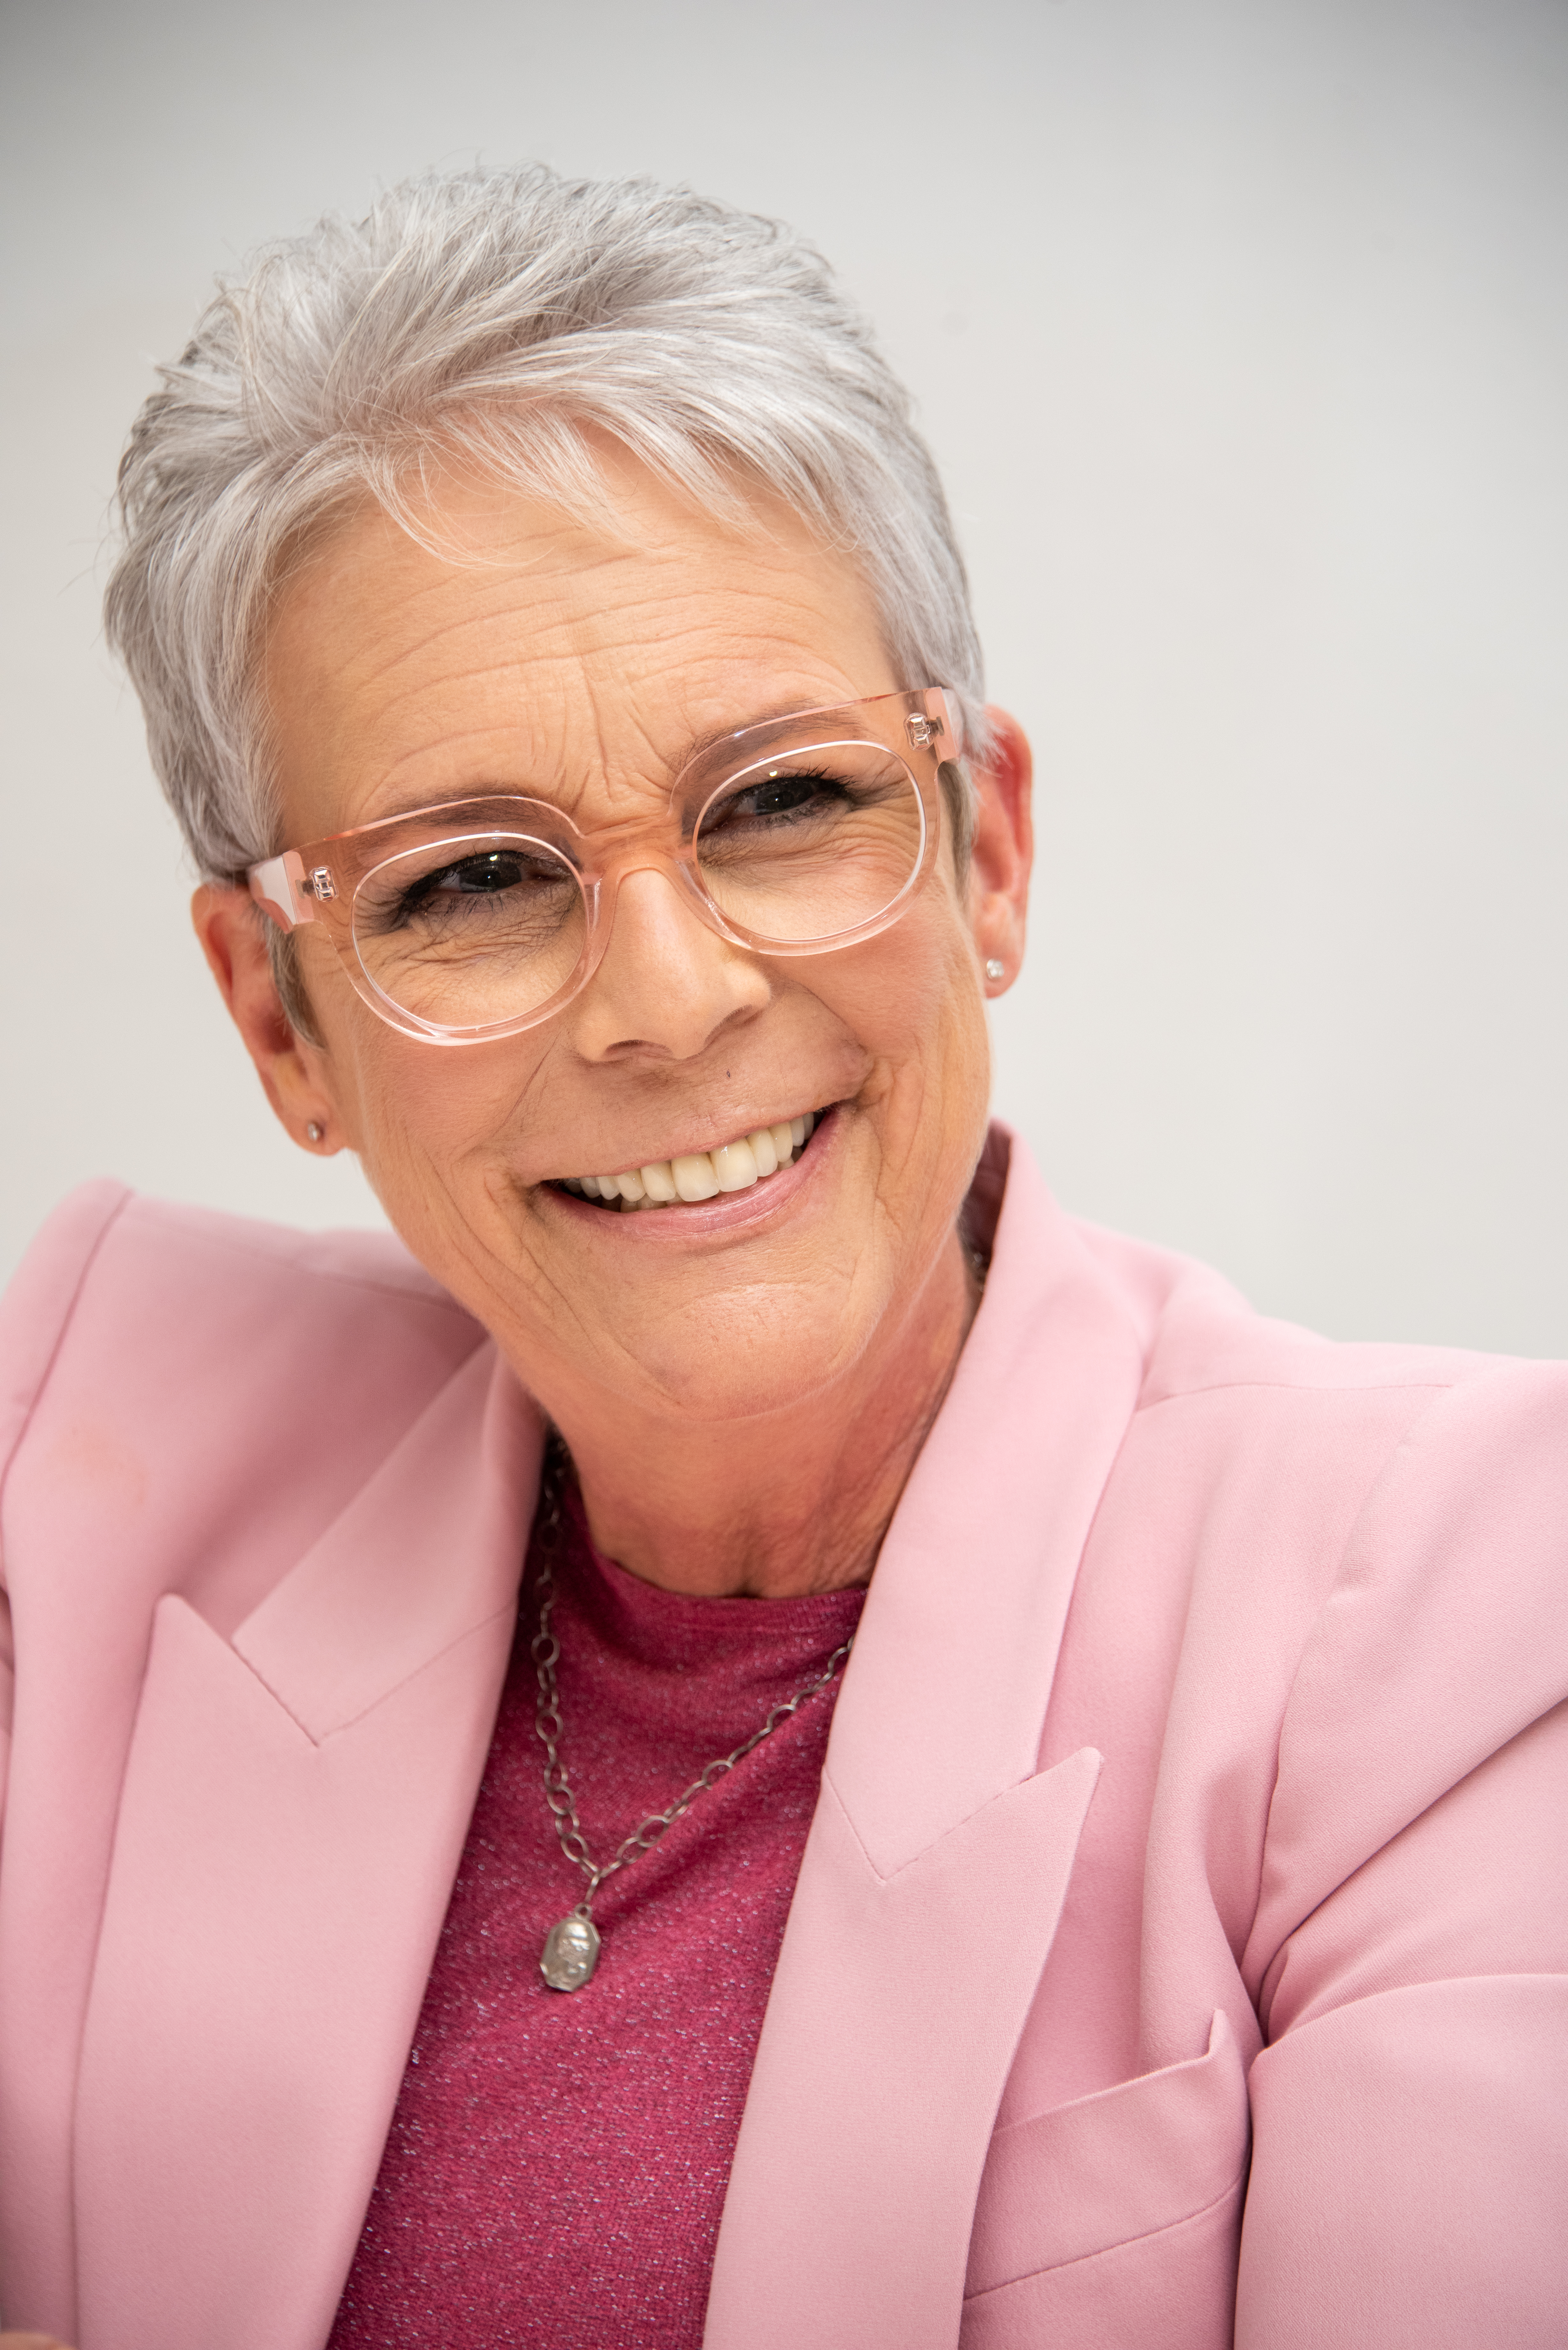 Jamie Lee Curtis on November 15, 2019, in Beverly Hills, California | Source: Getty Images